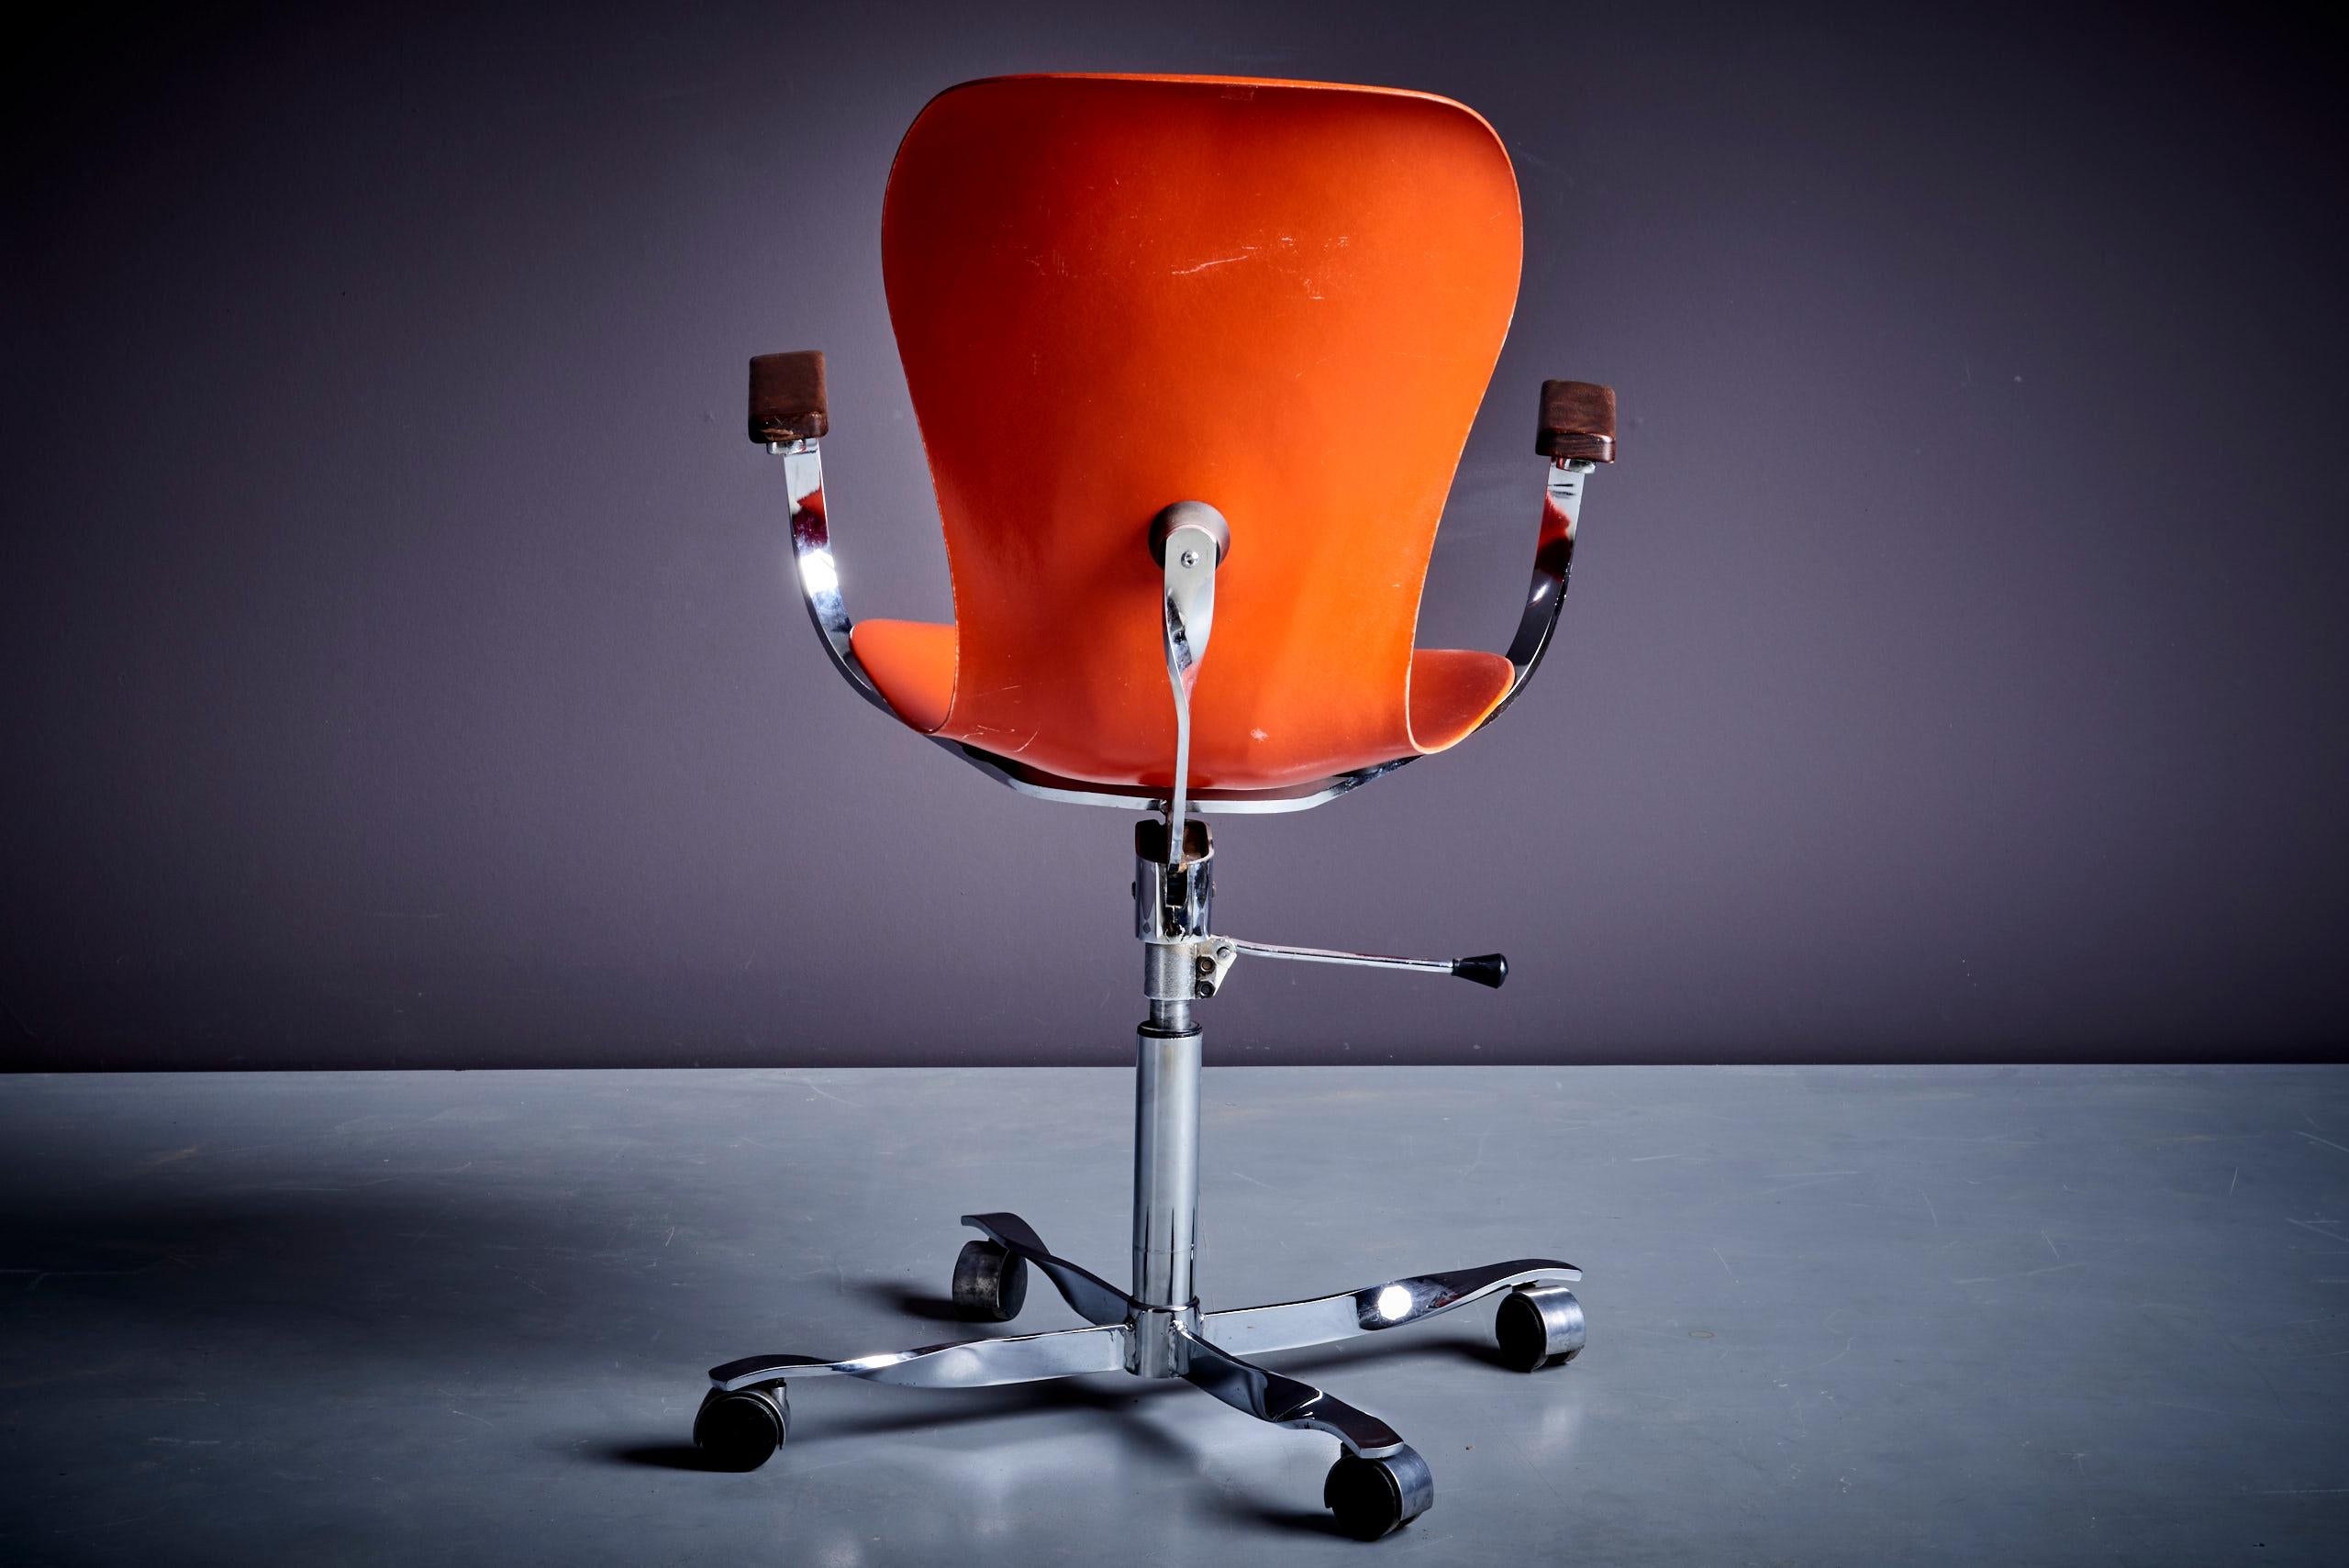 Rare desk chair by Gideon Kramer created 1962 for the worlds fair in Seattle.
Height is adjustable.